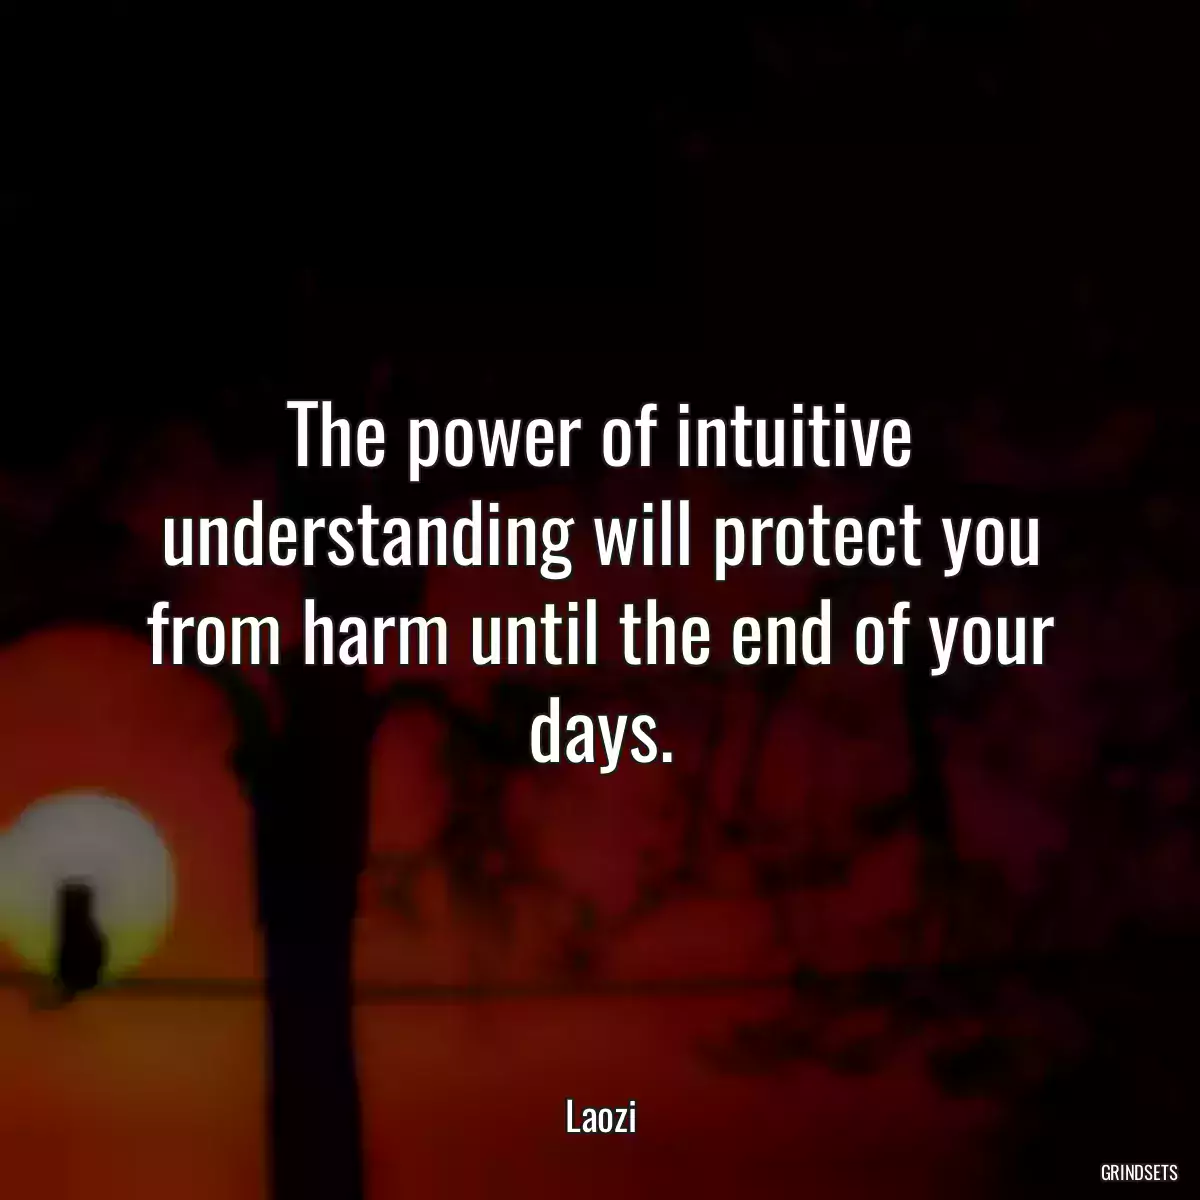 The power of intuitive understanding will protect you from harm until the end of your days.